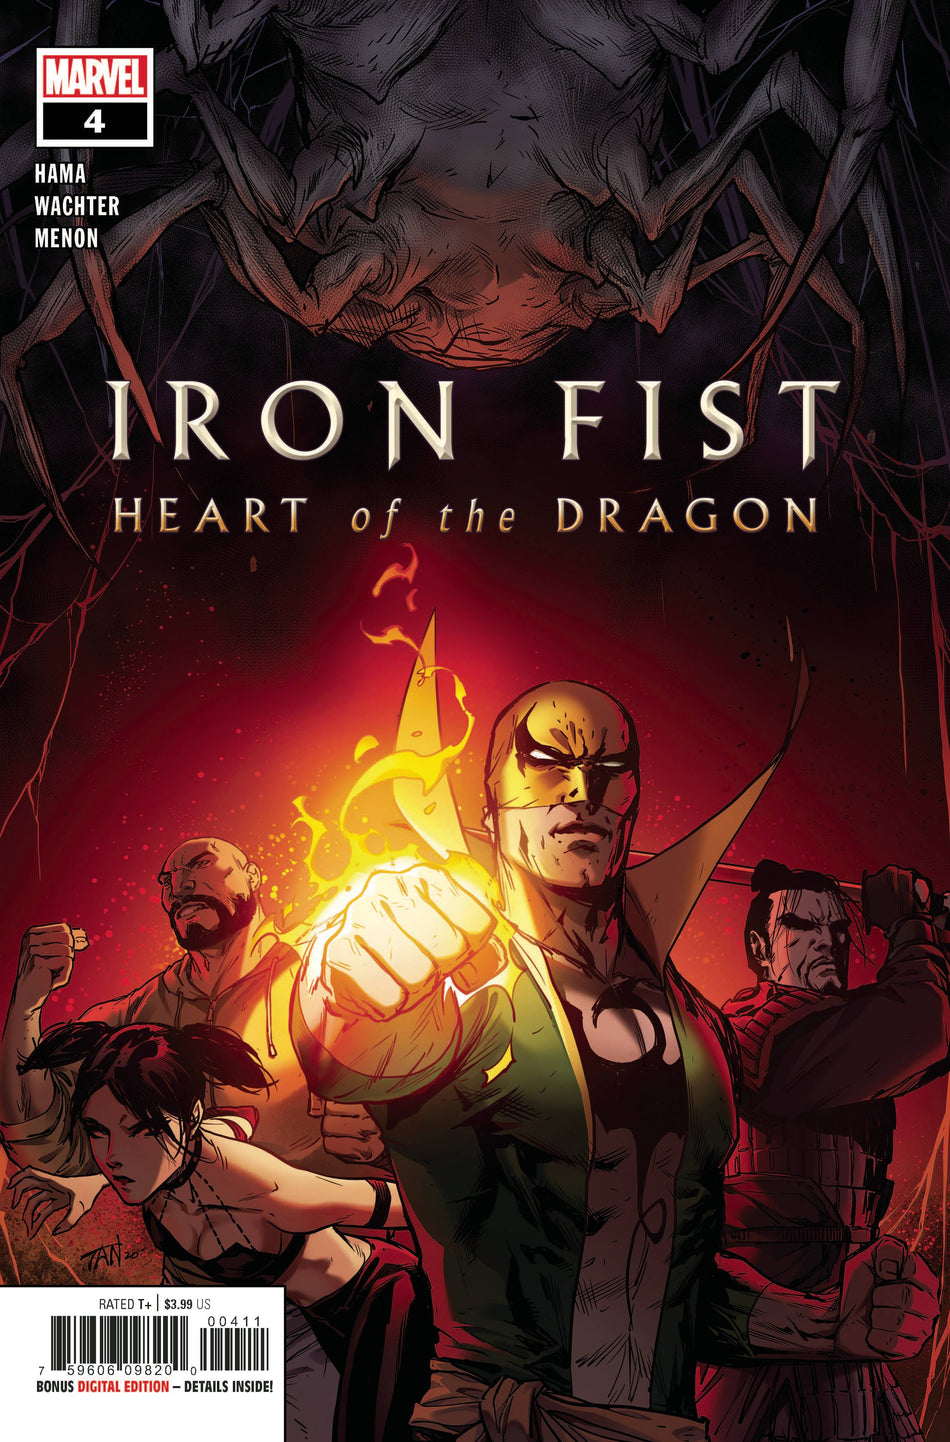 Photo of Iron Fist Heart of Dragon Issue 4 (of 6) - NM comic sold by Stronghold Collectibles